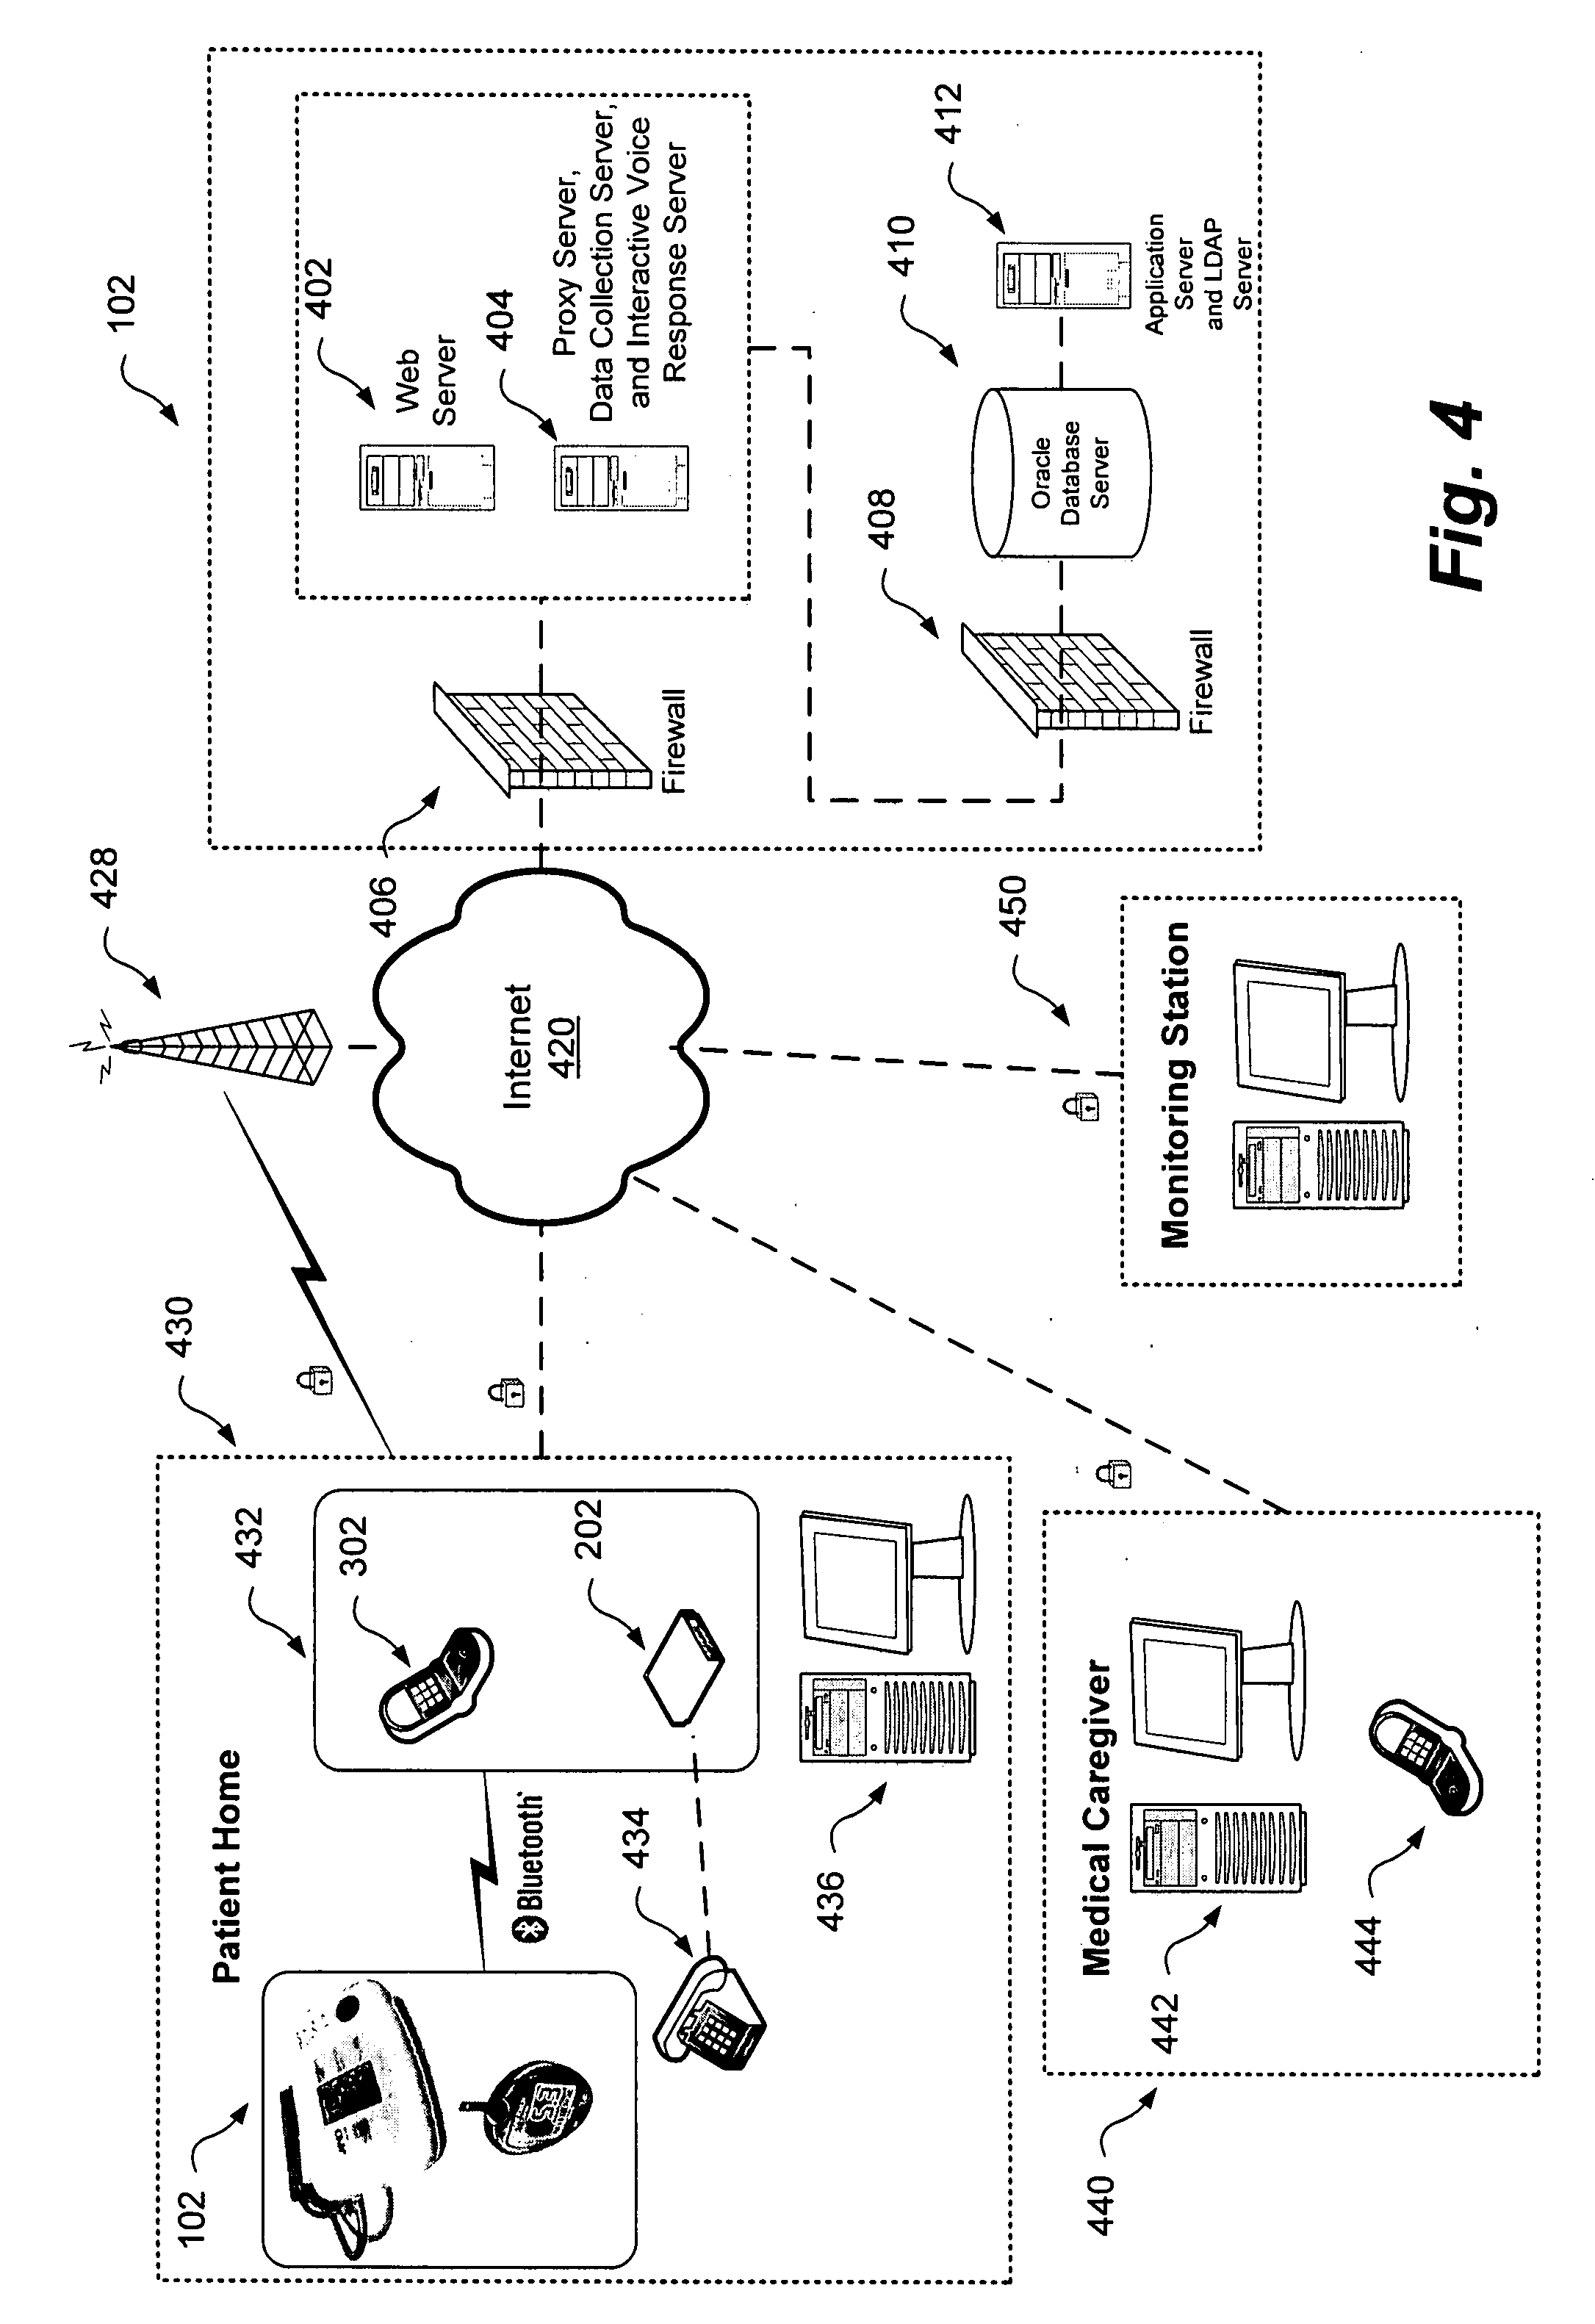 Health monitoring system and method